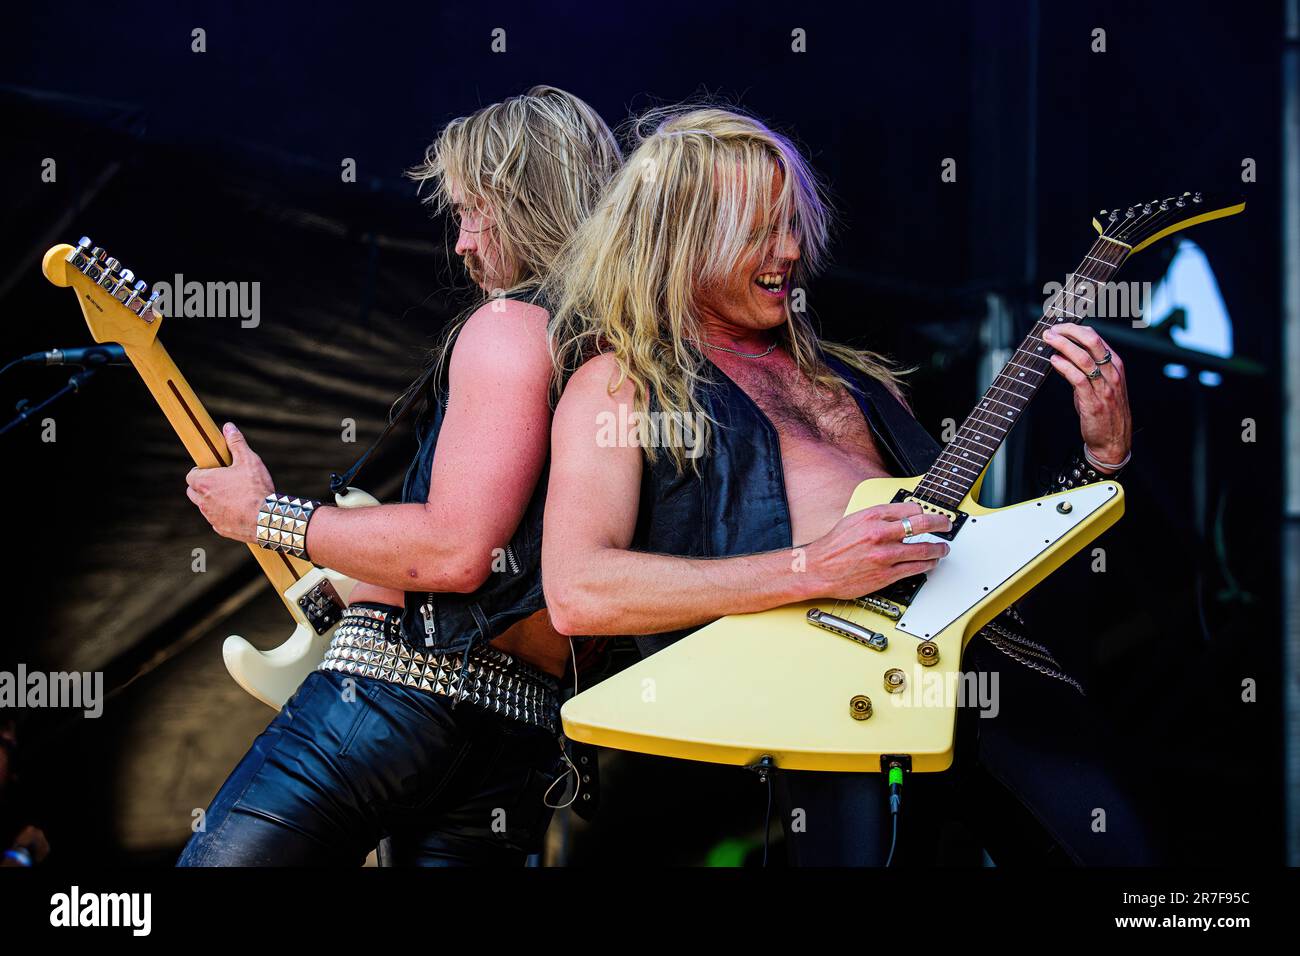 Copenhagen, Denmark. 14th June, 2023. The Swedish heavy metal band Enforcer performs a live concert during the Danish heavy metal festival Copenhell 2023 in Copenhagen. Here vocalist and guitarist Olof Wikstrand (R) is seen live on stage with guitarist Jonathan Nordwall (L). (Photo Credit: Gonzales Photo/Alamy Live News Stock Photo